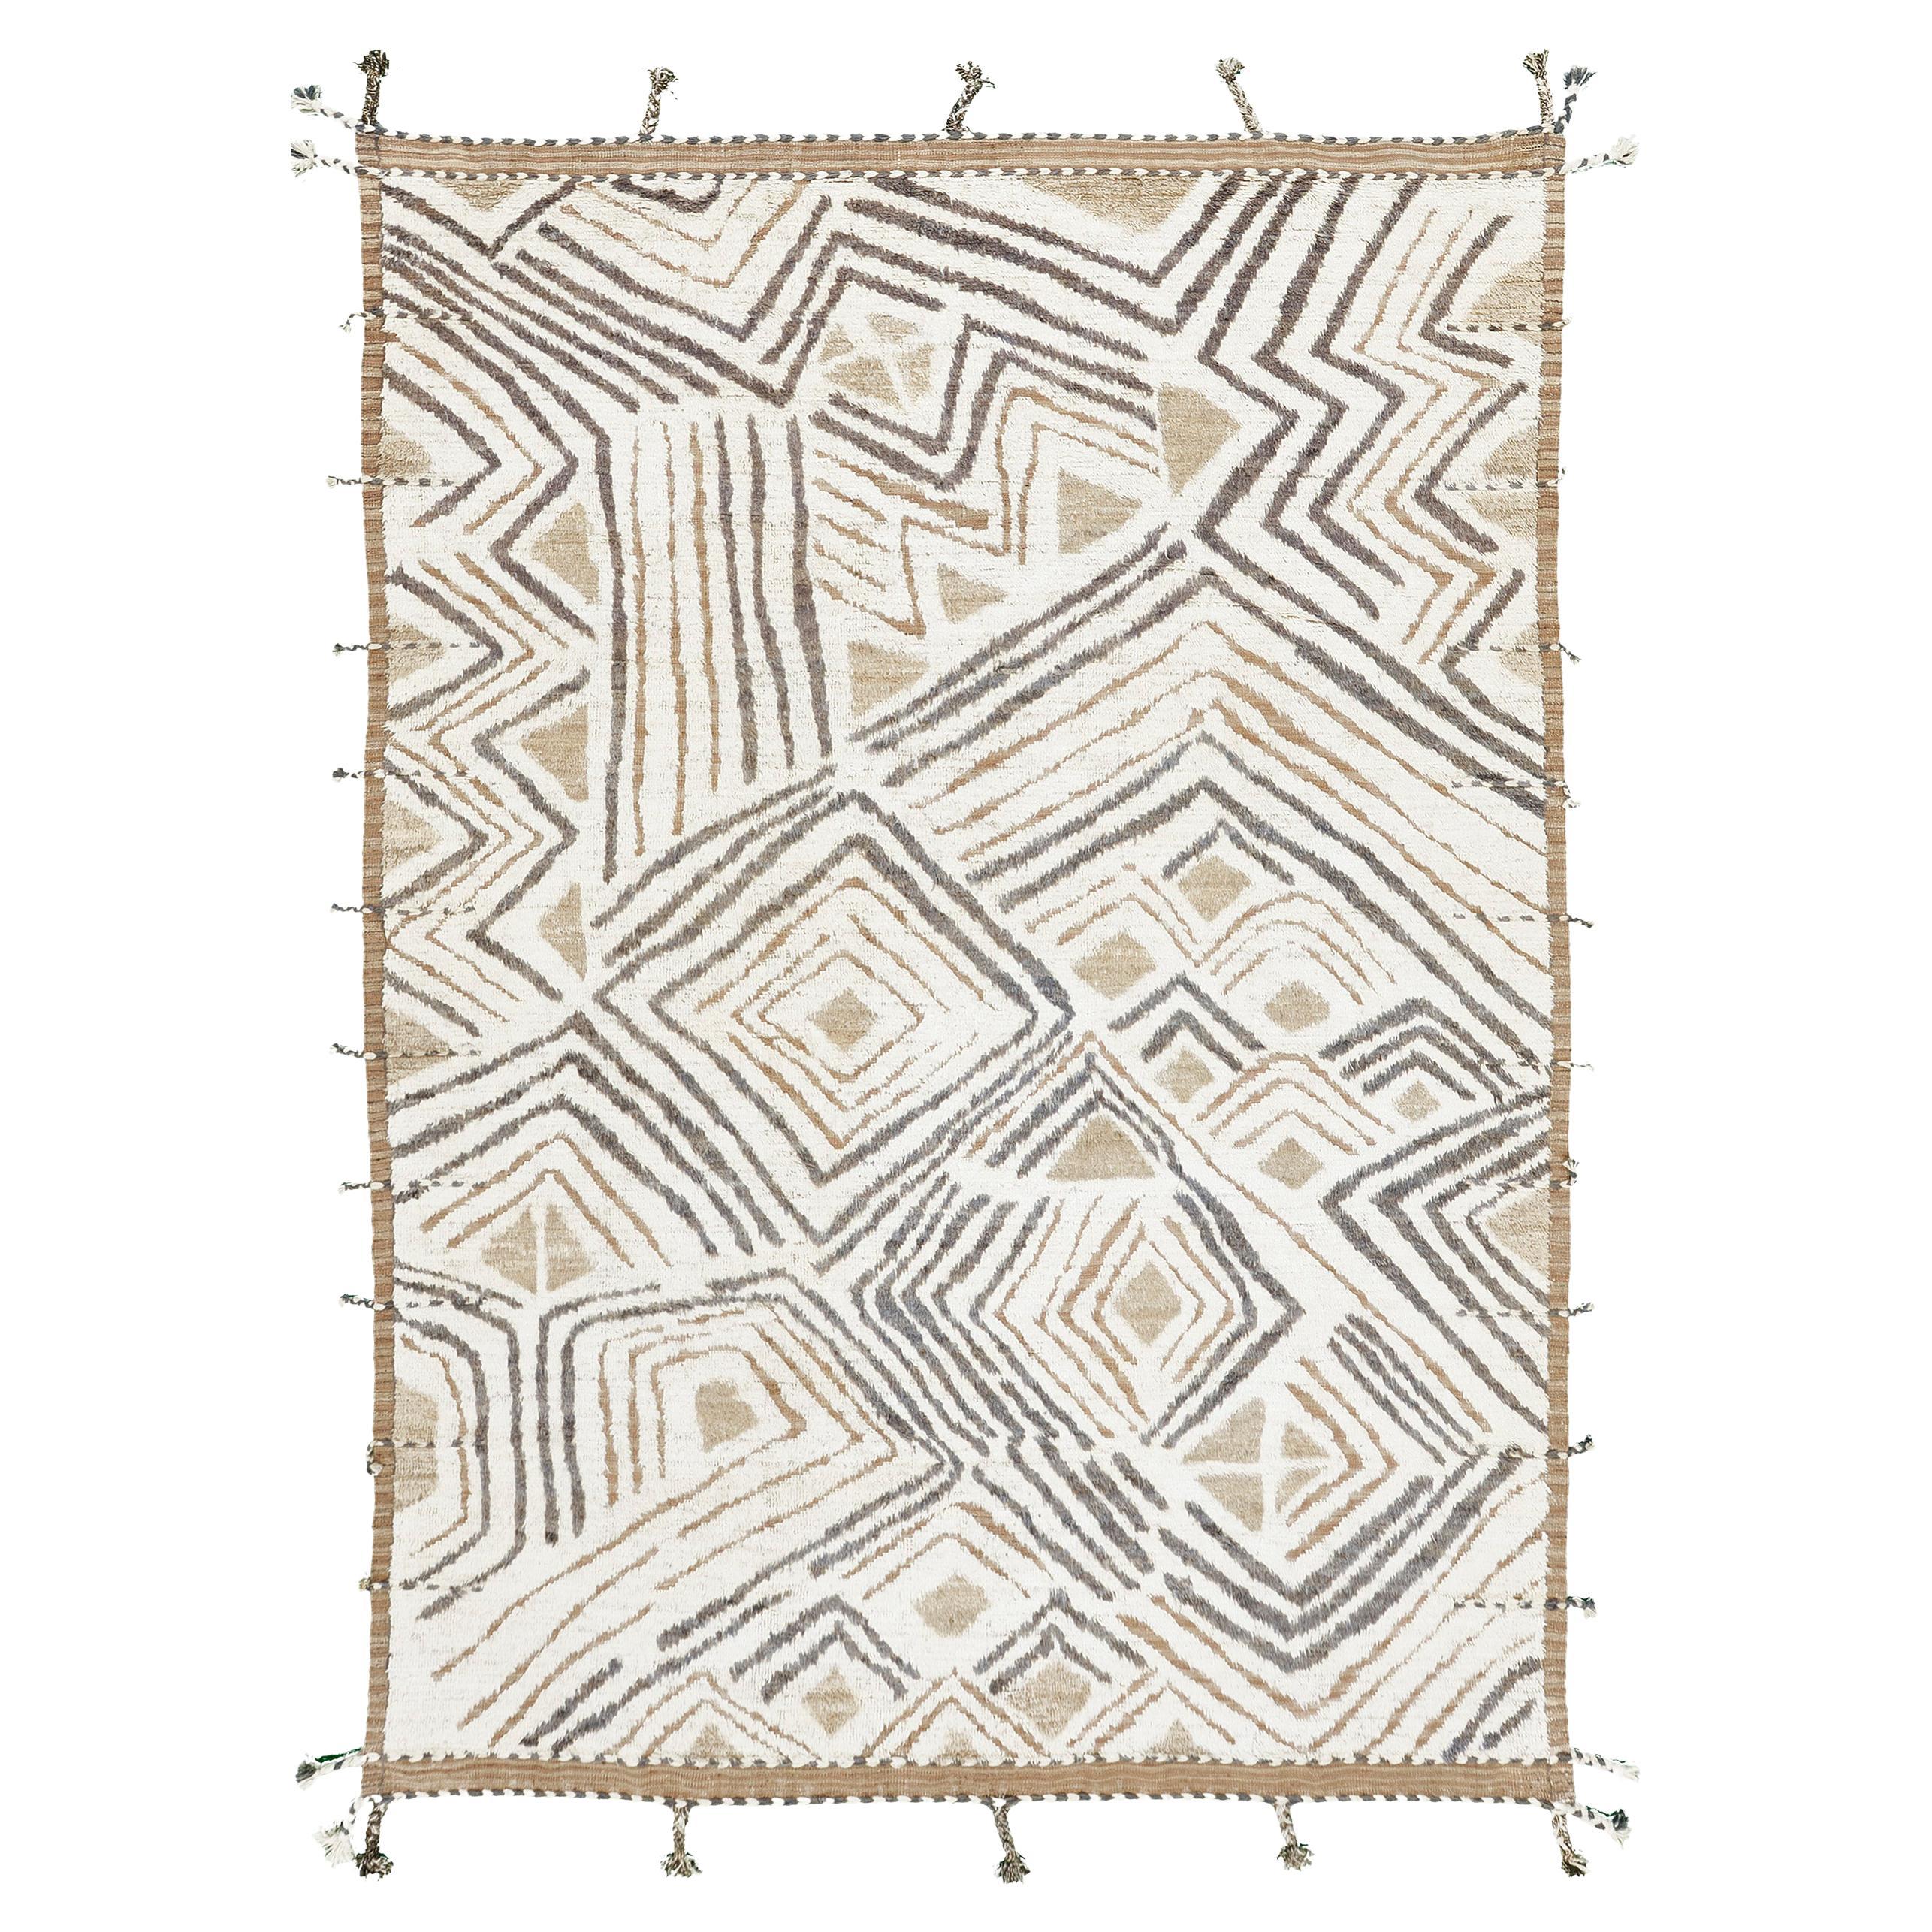 The Amsum rug is a pile woven wool piece with a stunning and stylish design. An ivory field with unique embossed detailing elements of brown, gold, and soft gray geometrical strokes makes the rug extra. This collection, 'Kust' also meaning 'coast'